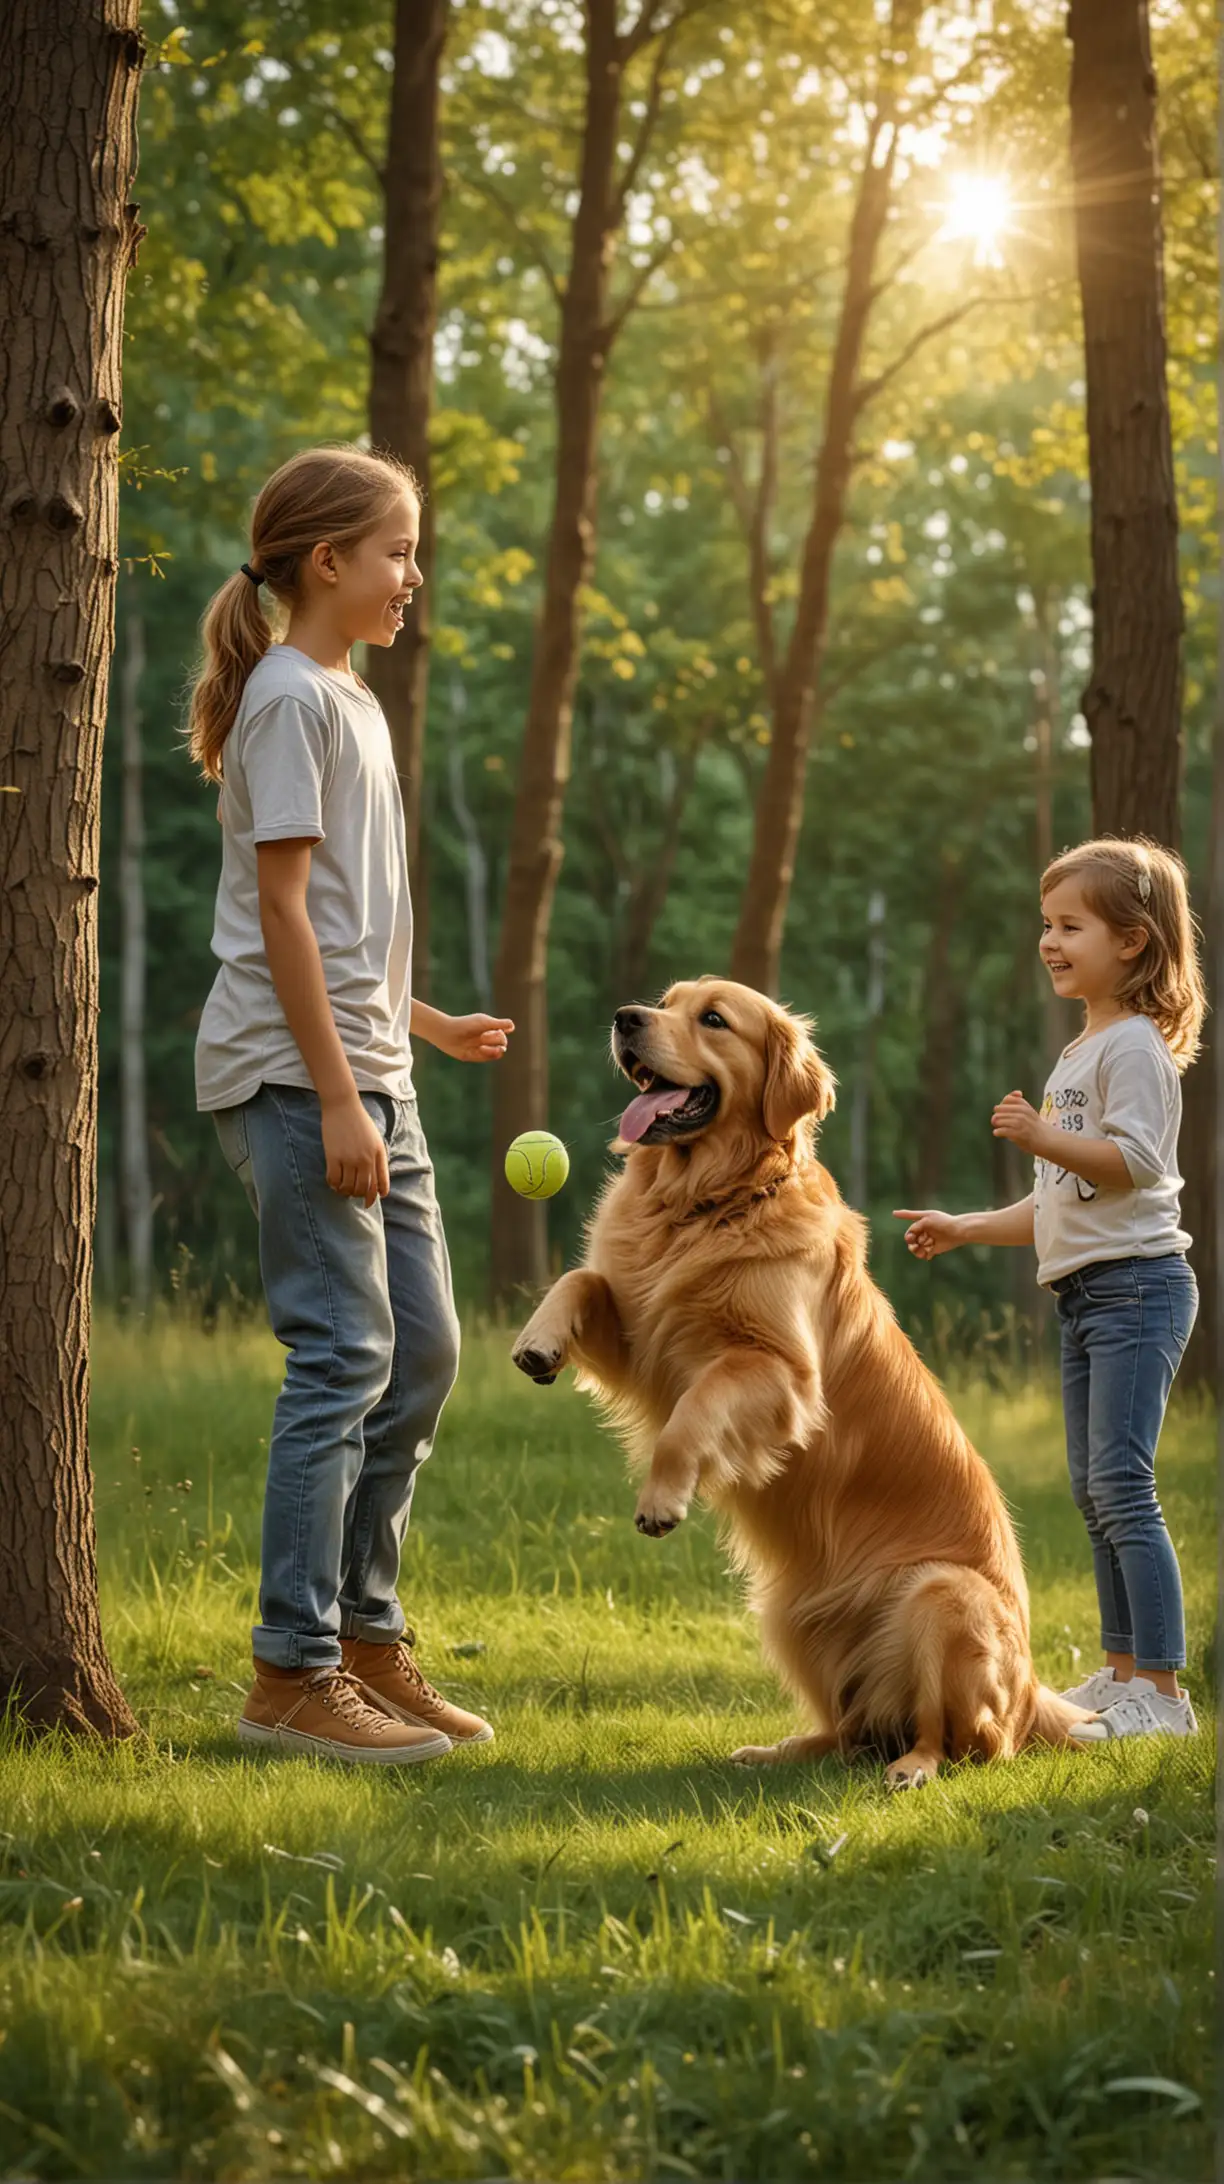 A cute golden retriever dog is playing ball with a young boy and a girl near a forest. the image is ultra realistic and has tall tress and grass fields. the kids and the dog are happliy playing ball in the evening day light a plesent picture
